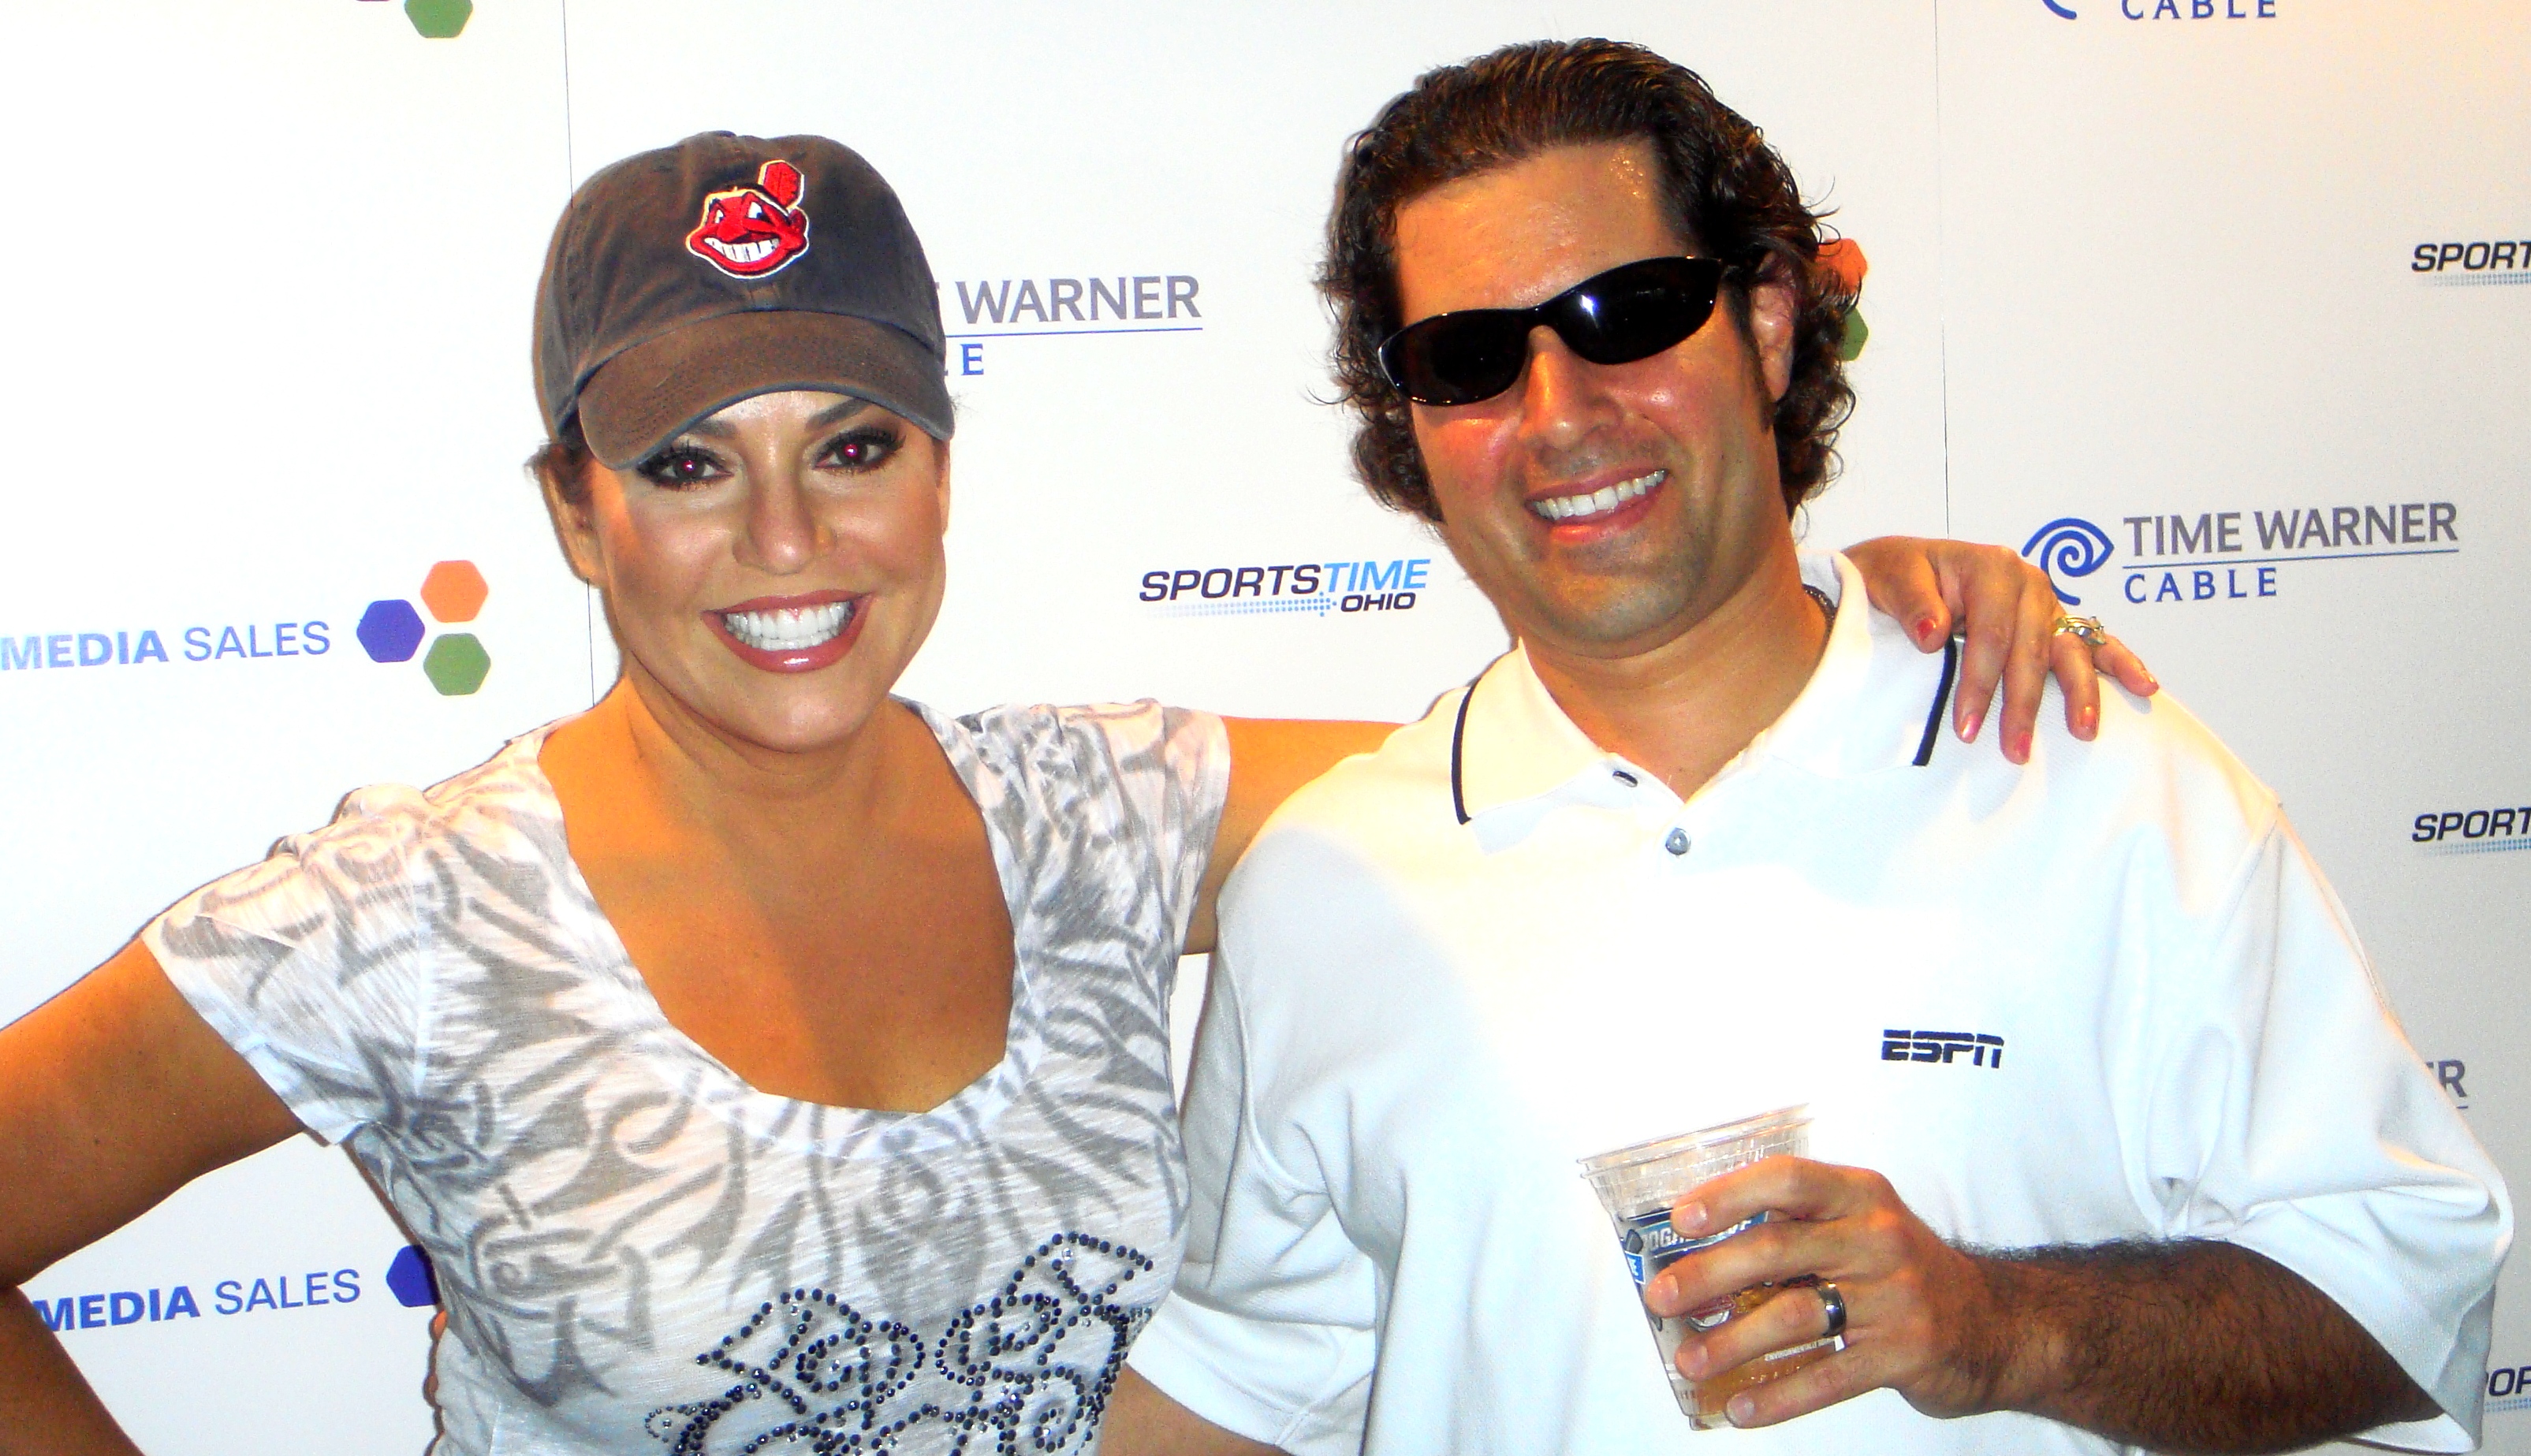 Fellow Ohioians' Robin Meade (Headline News) and Jim Fogarty (2 Ticks & The Dog Productions, Inc.) hanging out at a Time Warner Cable party at Progressive Field.